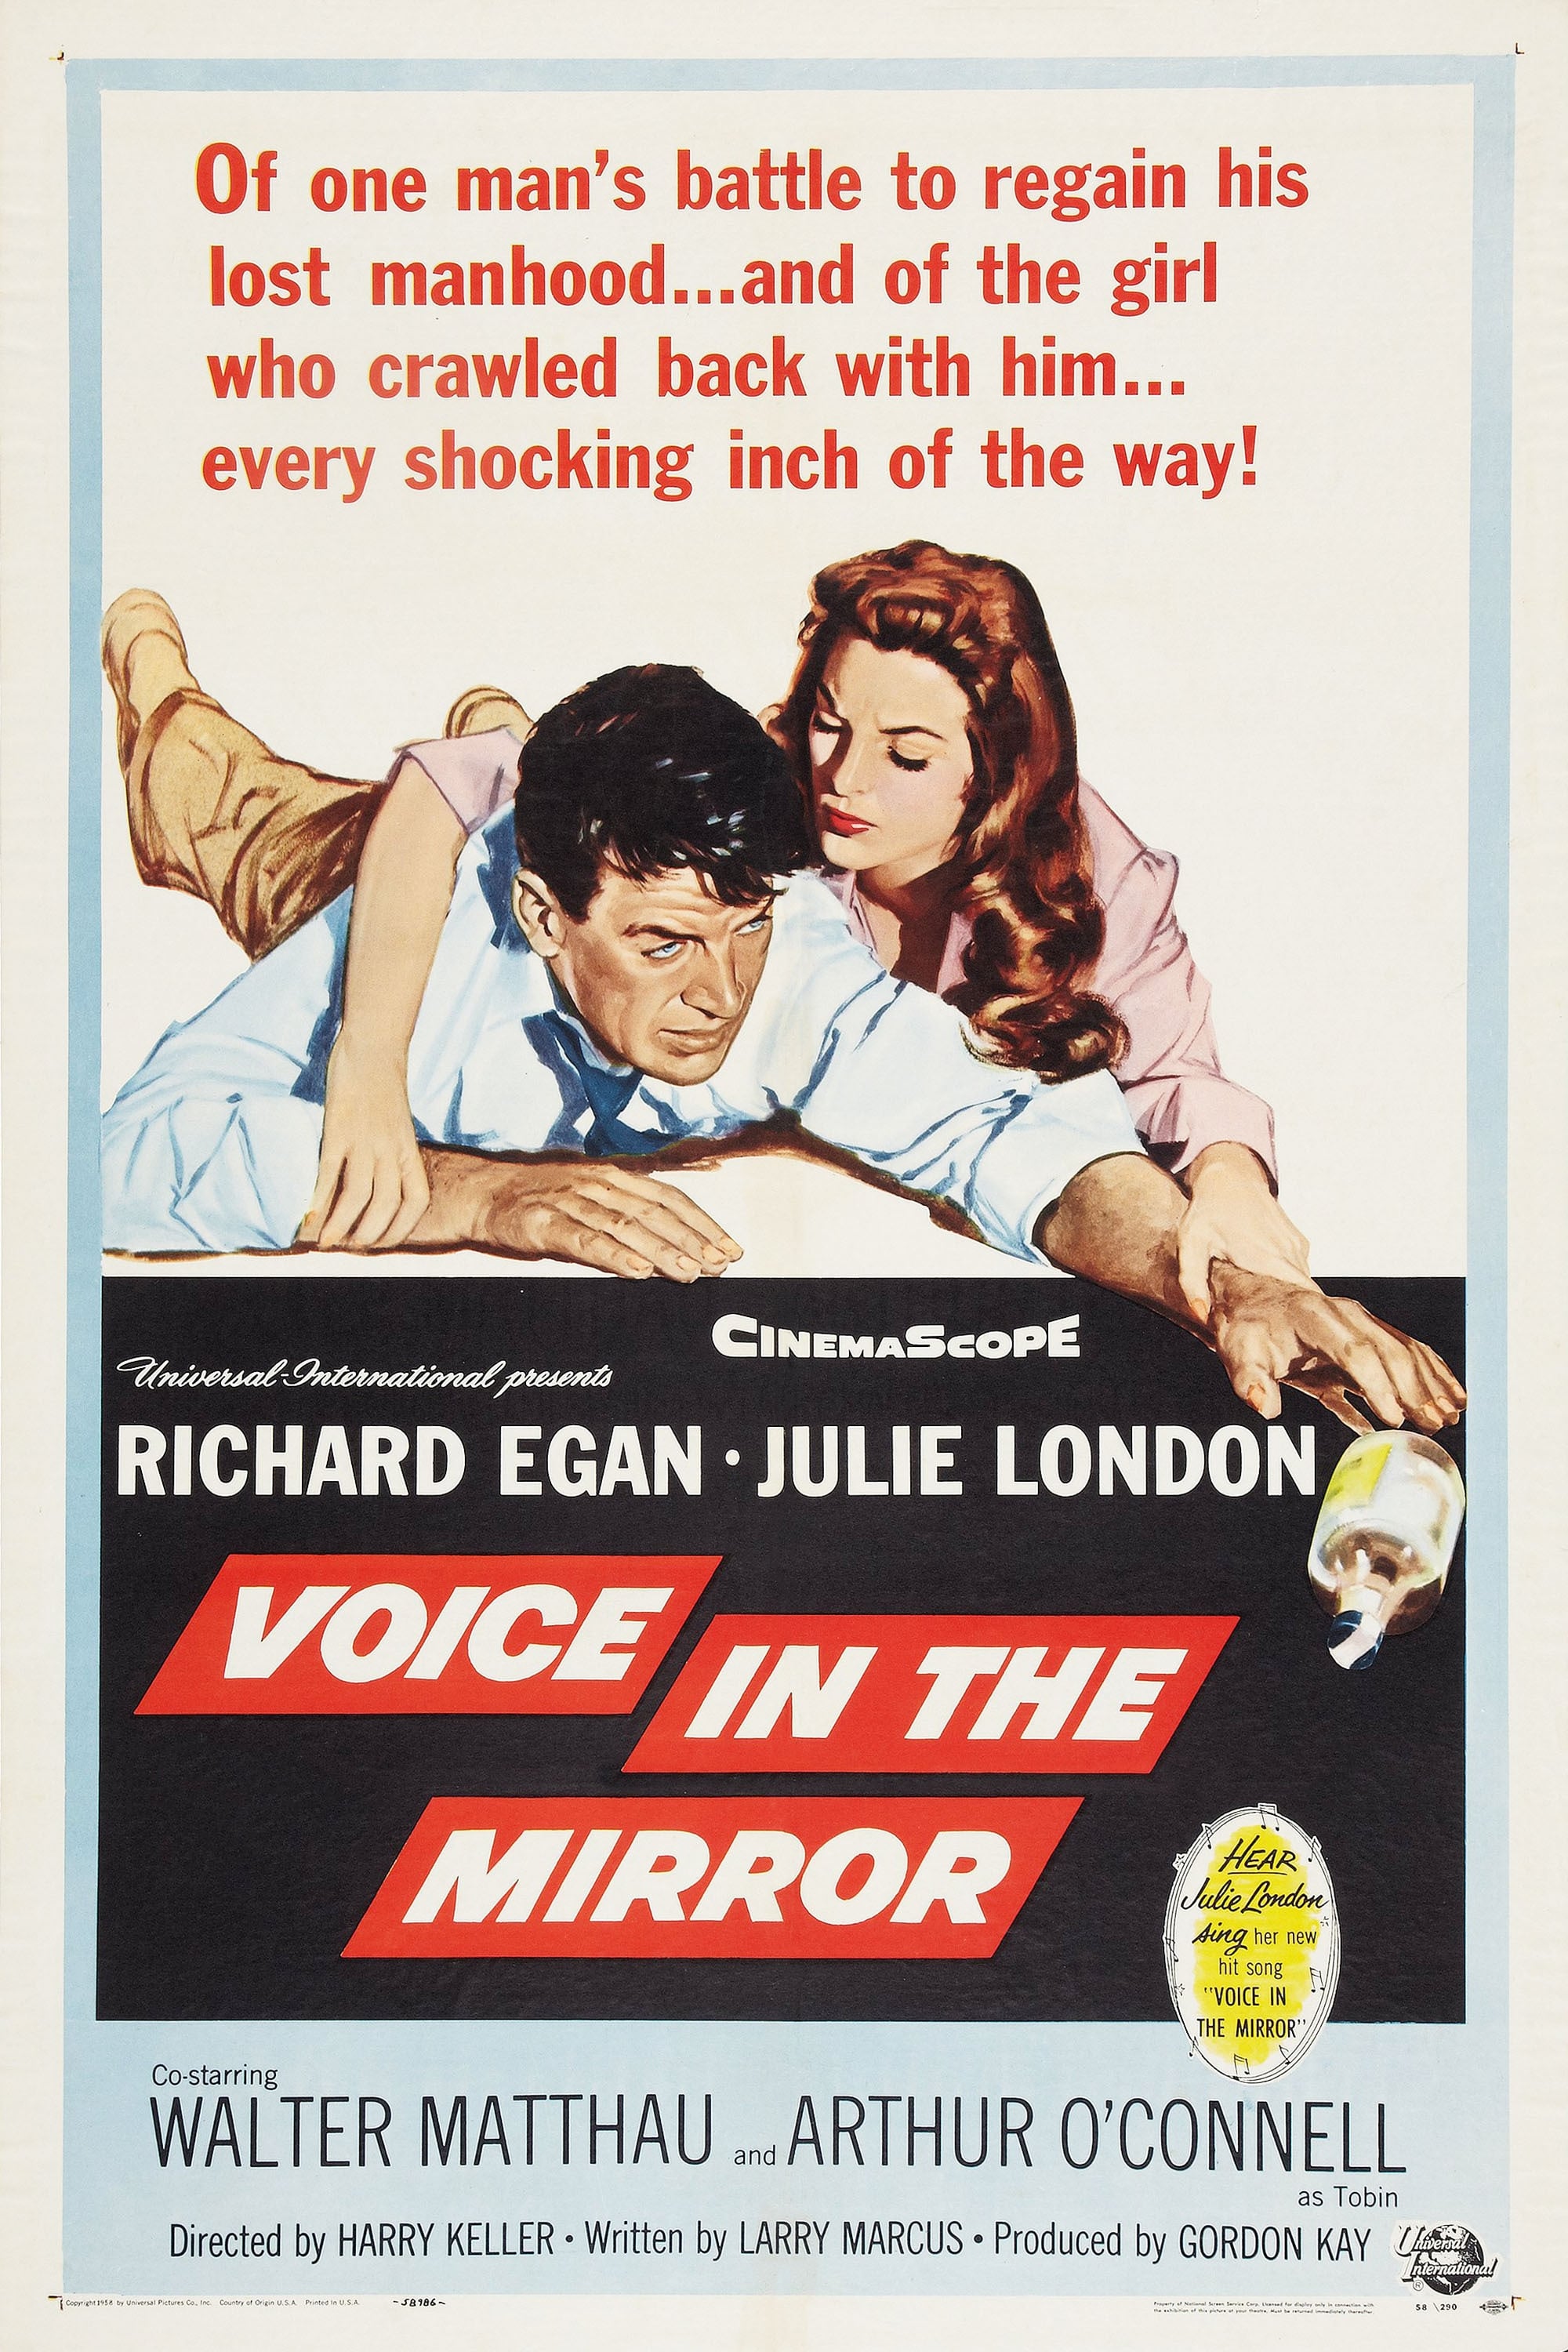 Voice in the Mirror (1958)